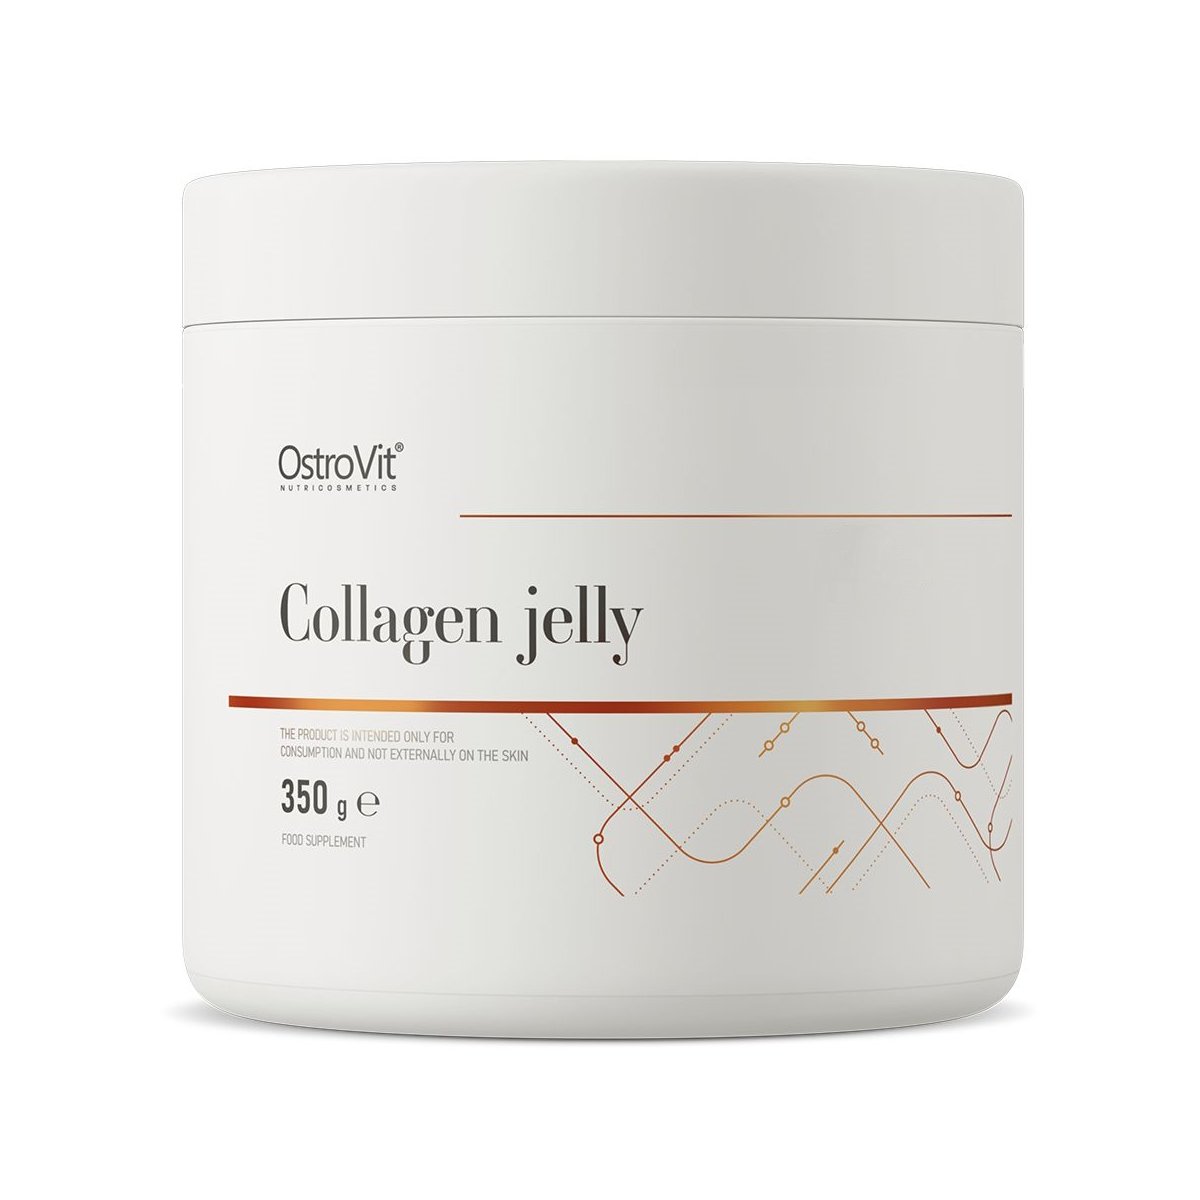 Препарат для суставов и связок OstroVit Collagen Jelly, 350 грамм Вишня,  ml, OstroVit. For joints and ligaments. General Health Ligament and Joint strengthening 